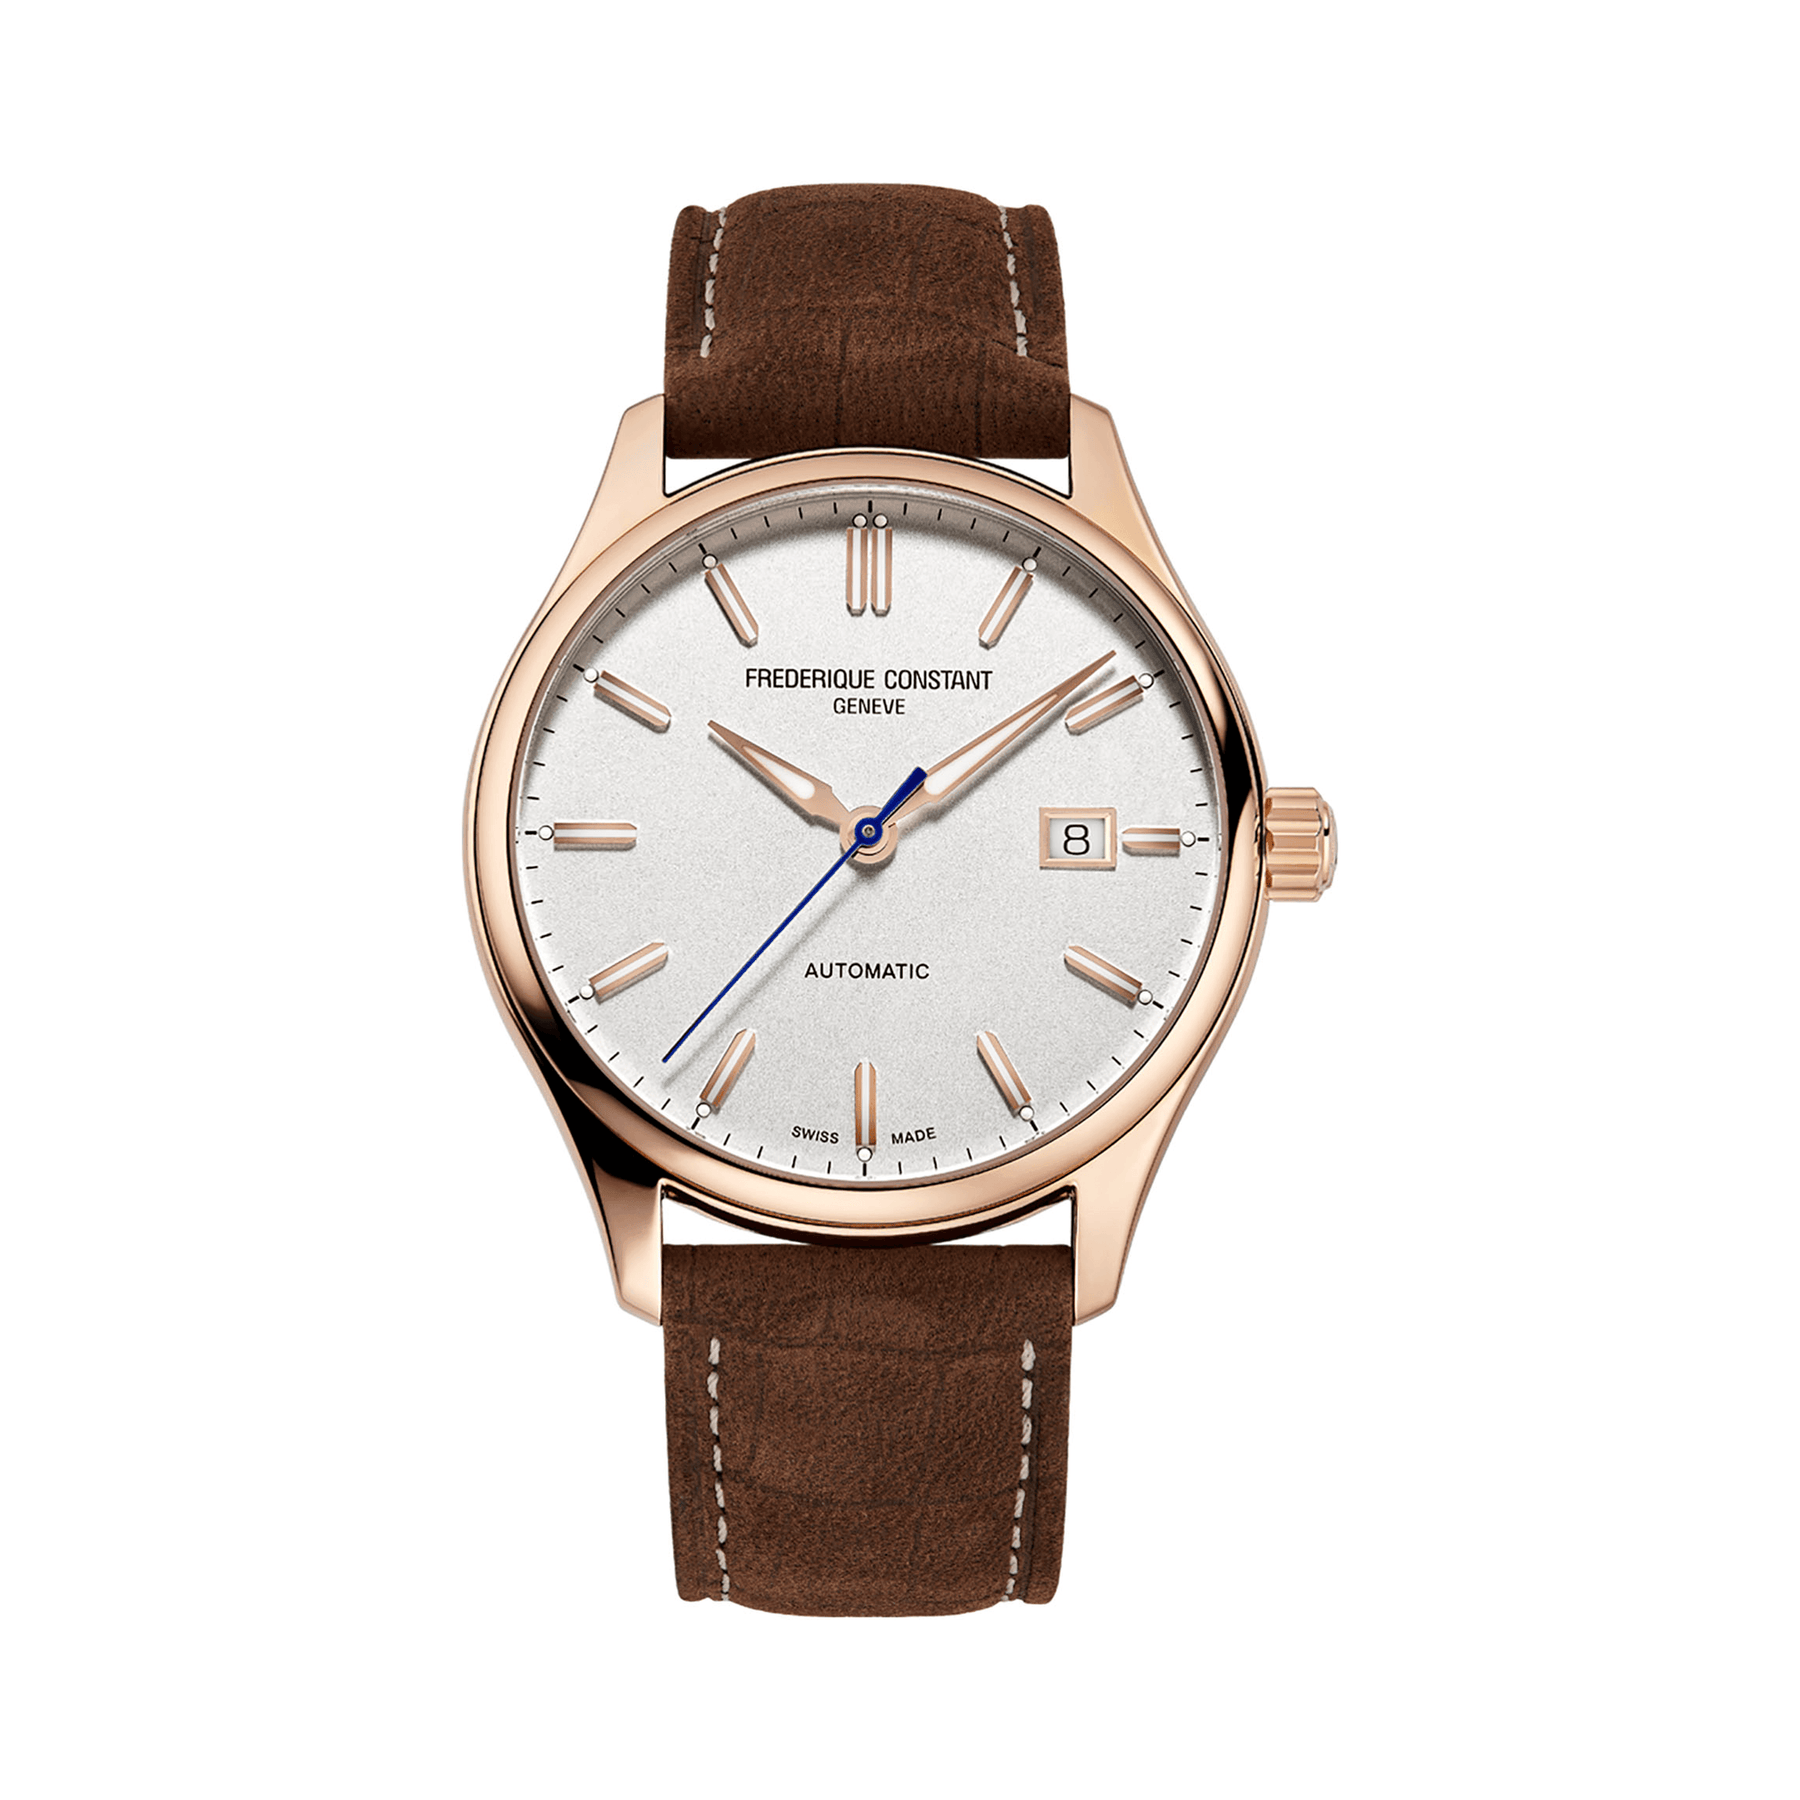 Frederique Constant Classic Men's 40mm Gold PVD Automatic Watch FC-303NV5B4 - Wallace Bishop